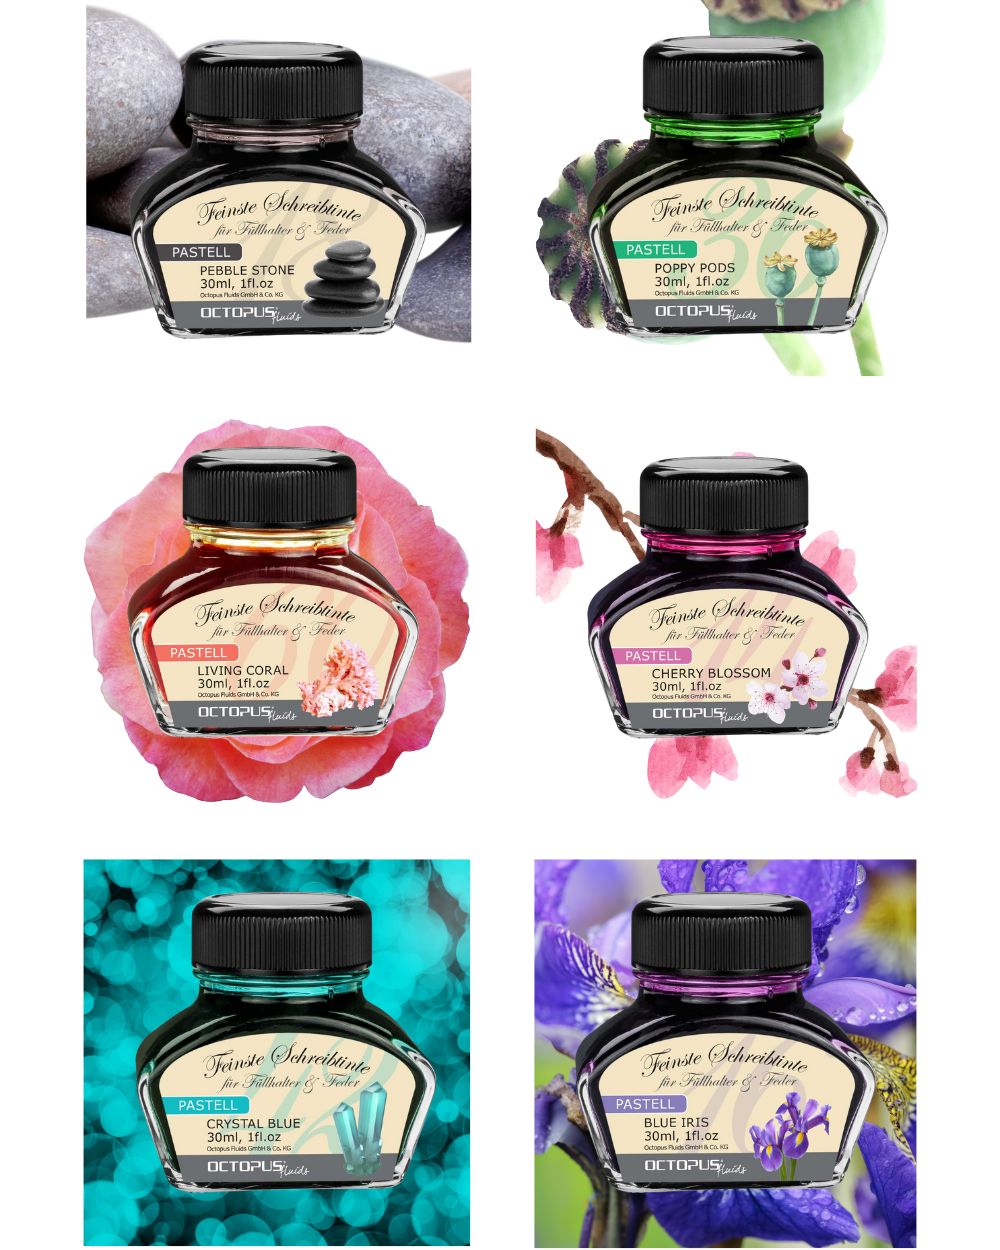 Couture Creations Glitter Accents Alcohol Ink Incandescent